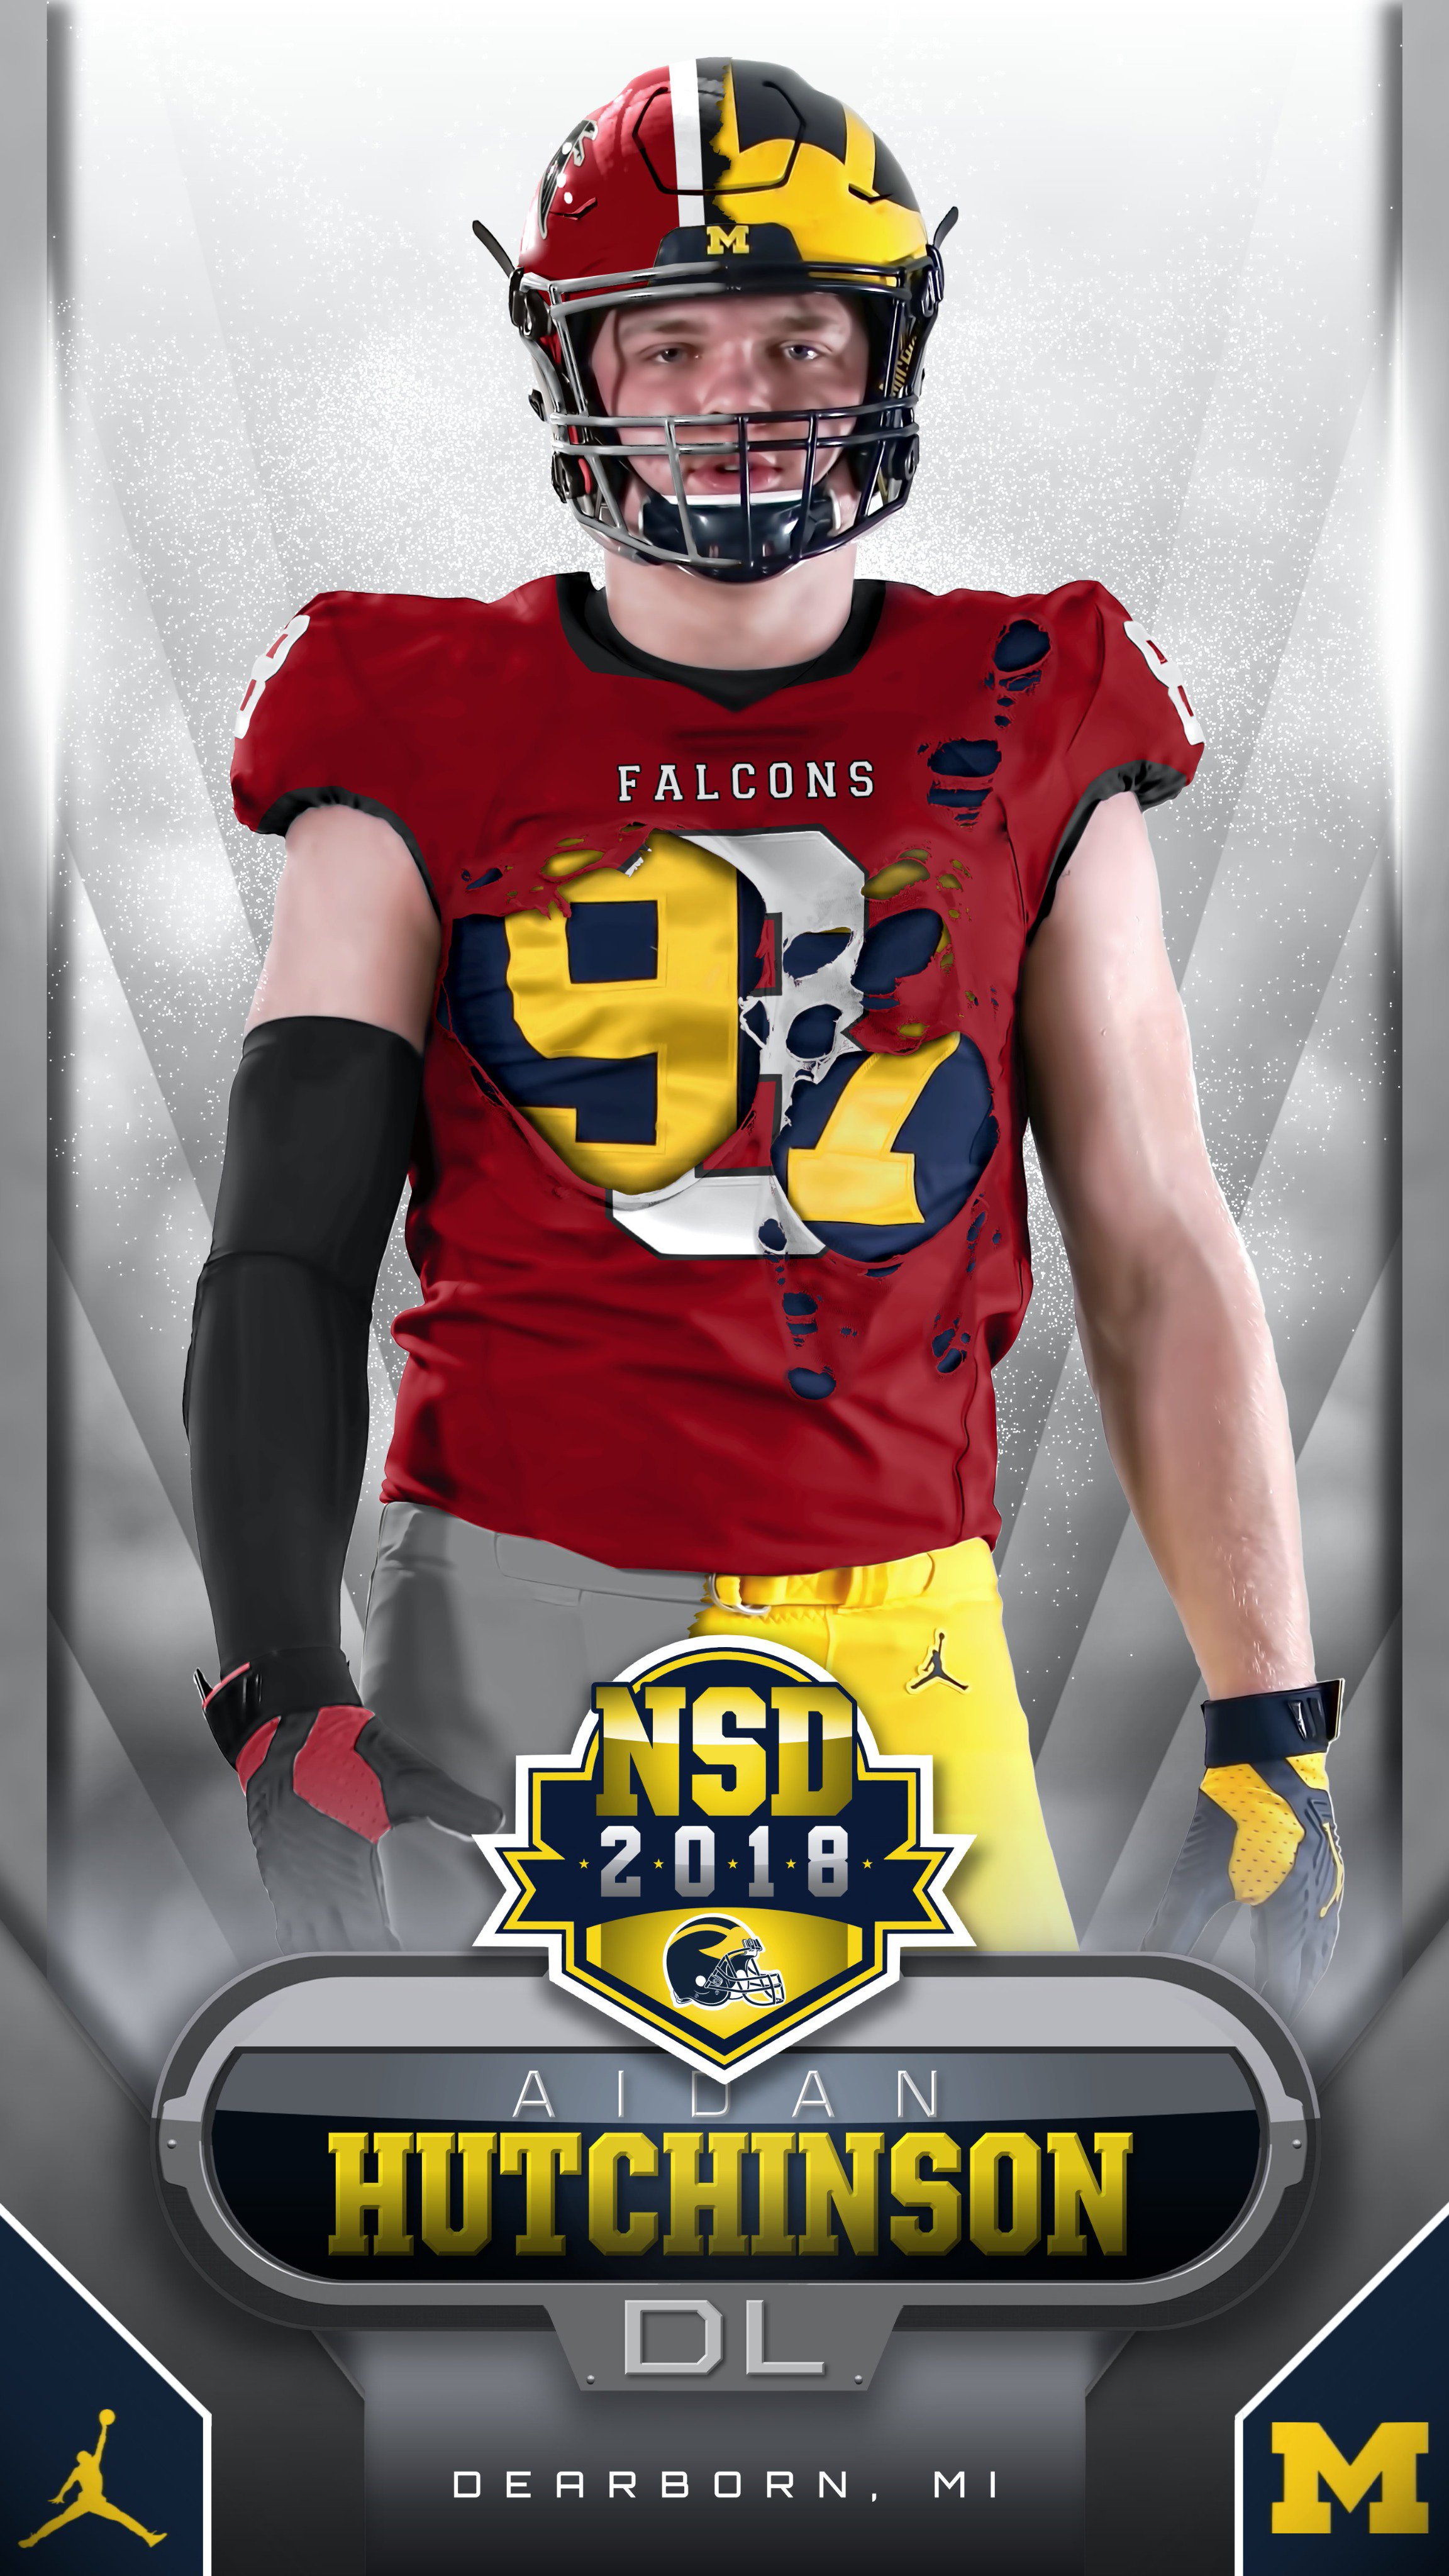 NFL Defensive Rookie of the Year Its Aidan Hutchinson  The Wright Way  Network